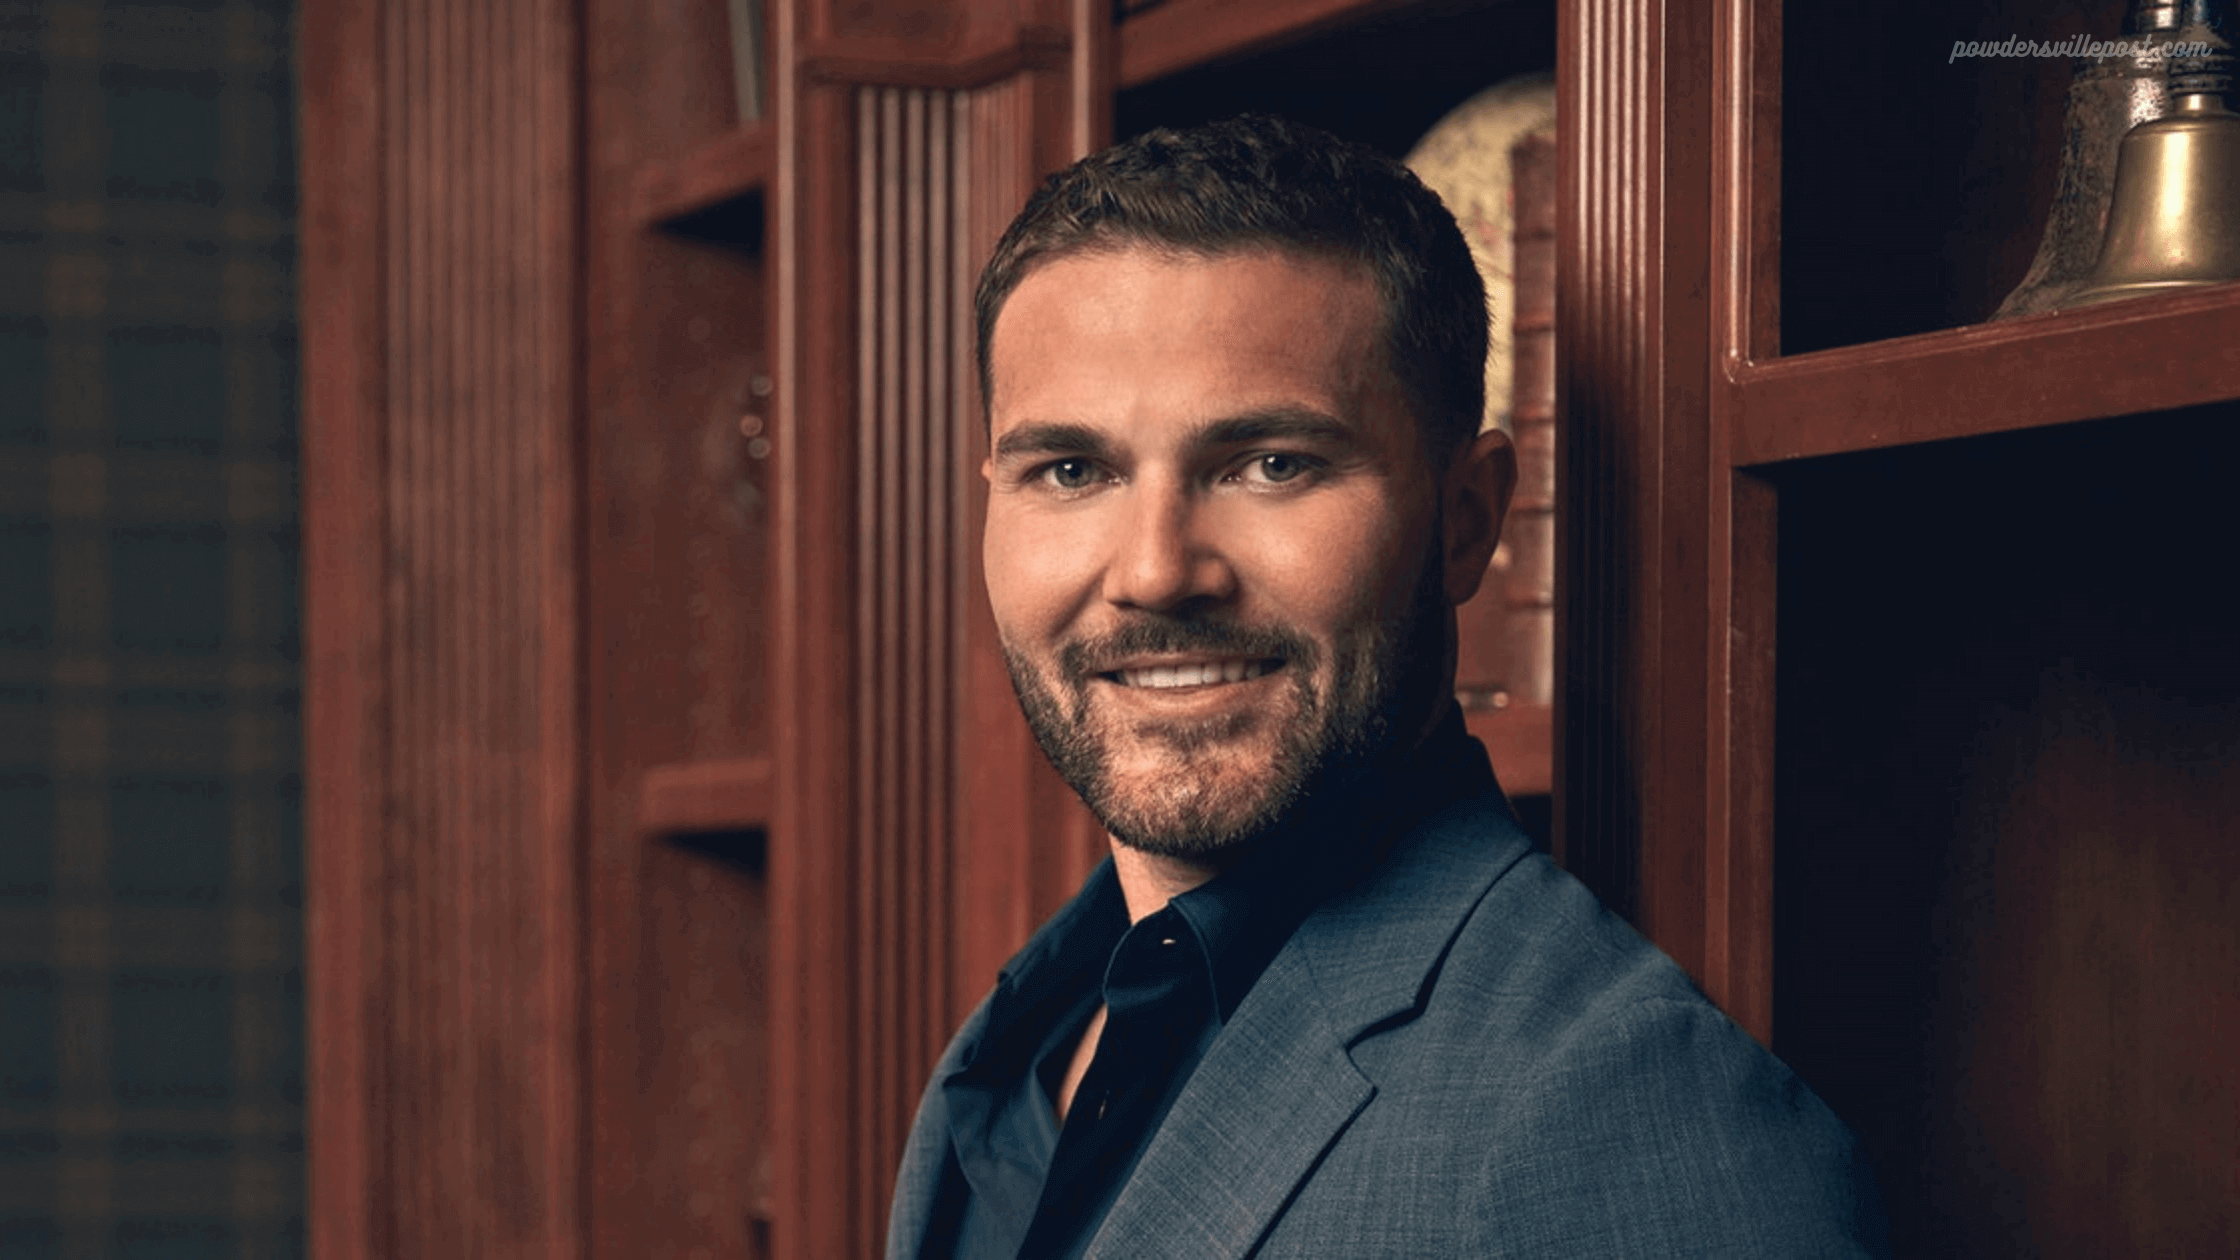 Steven McBee's Net Worth, Millionaire, Age, Family, Career, Wife, Early life